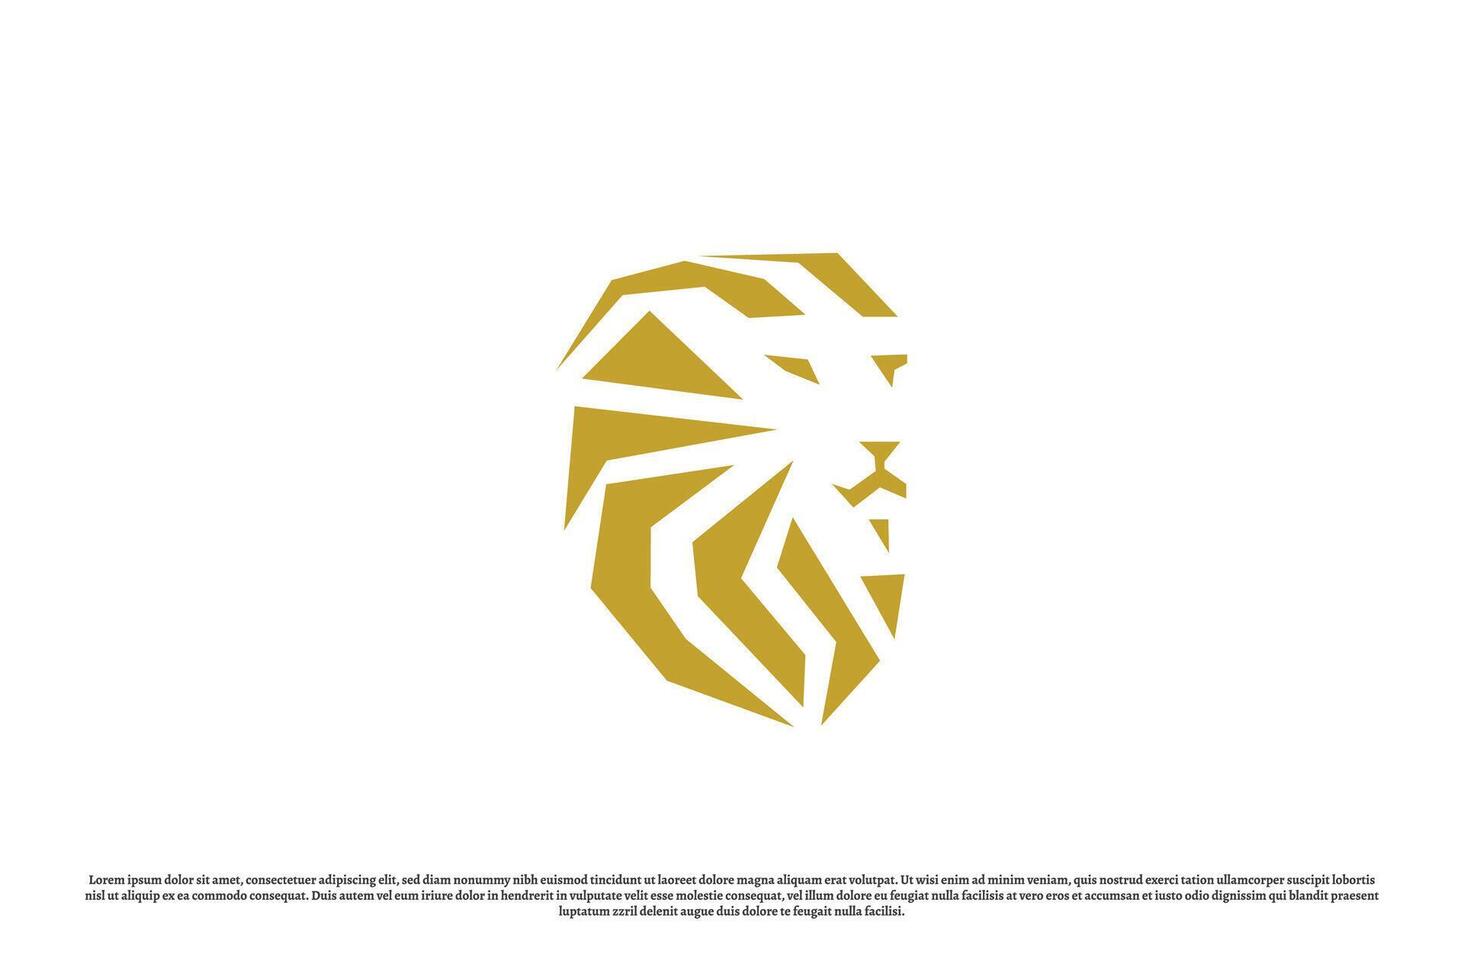 Lion face logo design illustration. Animal silhouette lion claws fangs hair brave authority peaceful calm king zoo. Creative unique abstract simple flat icon symbol honor pride elegant luxury crest. vector